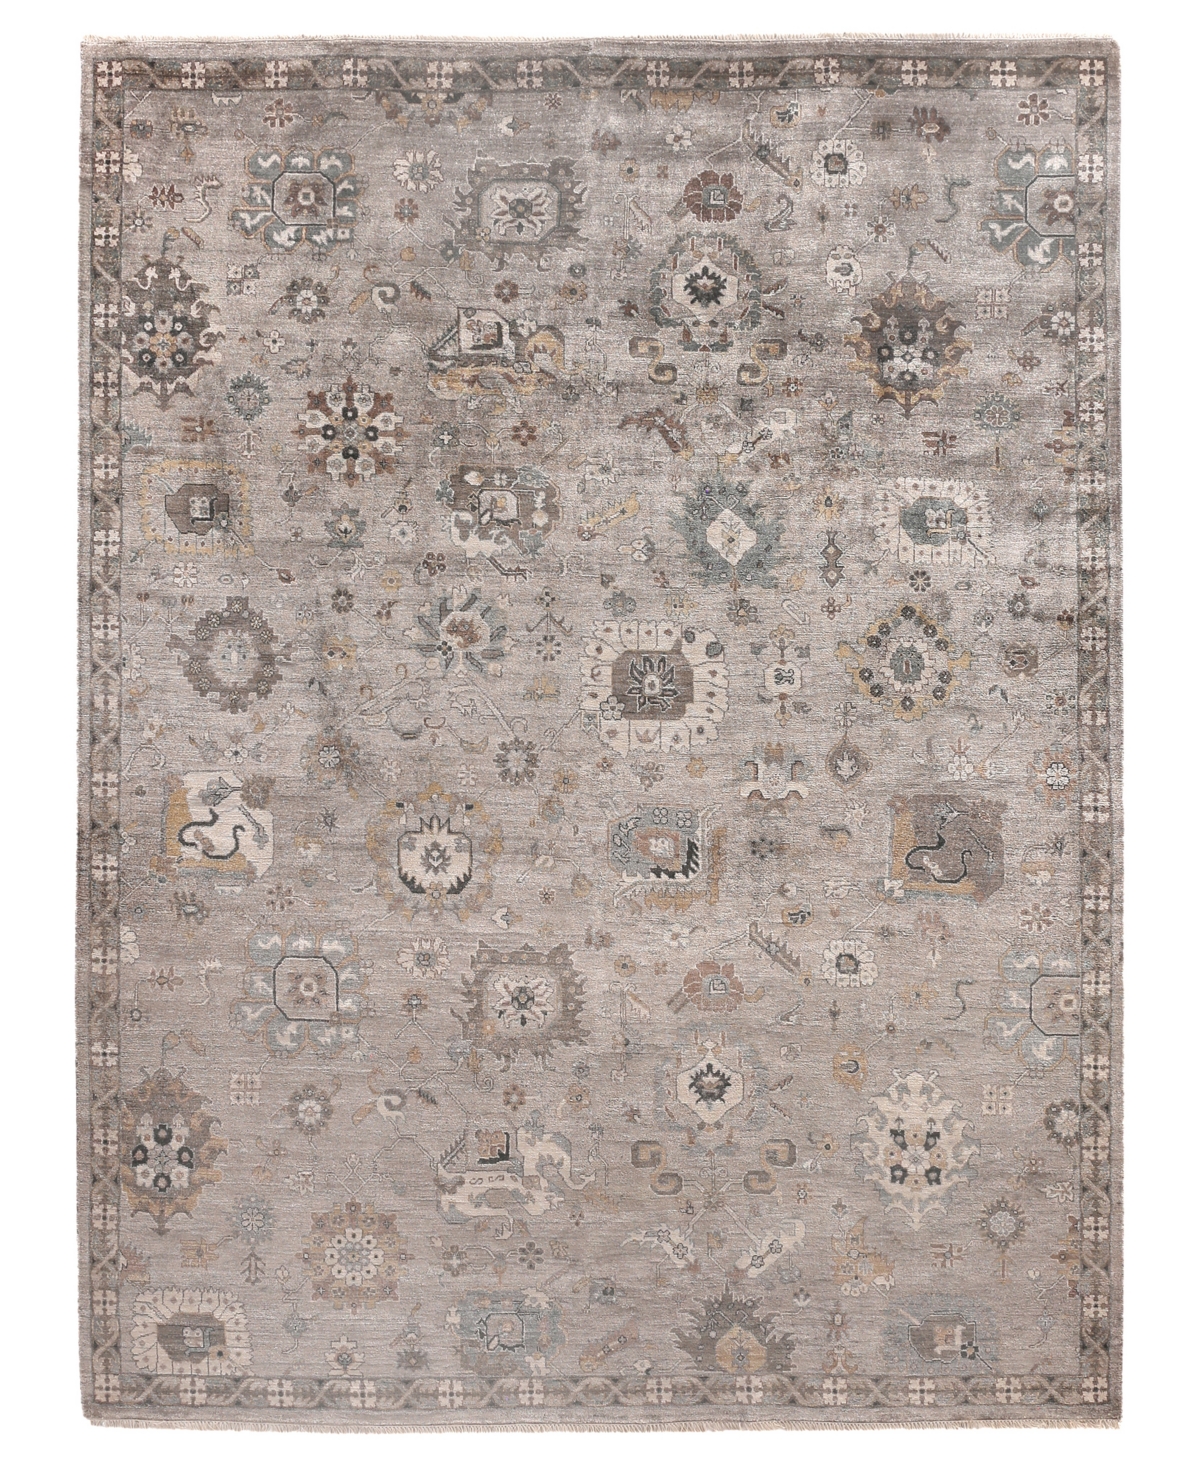 Exquisite Rugs Museum Er5198 6' X 9' Area Rug In Silver Tone